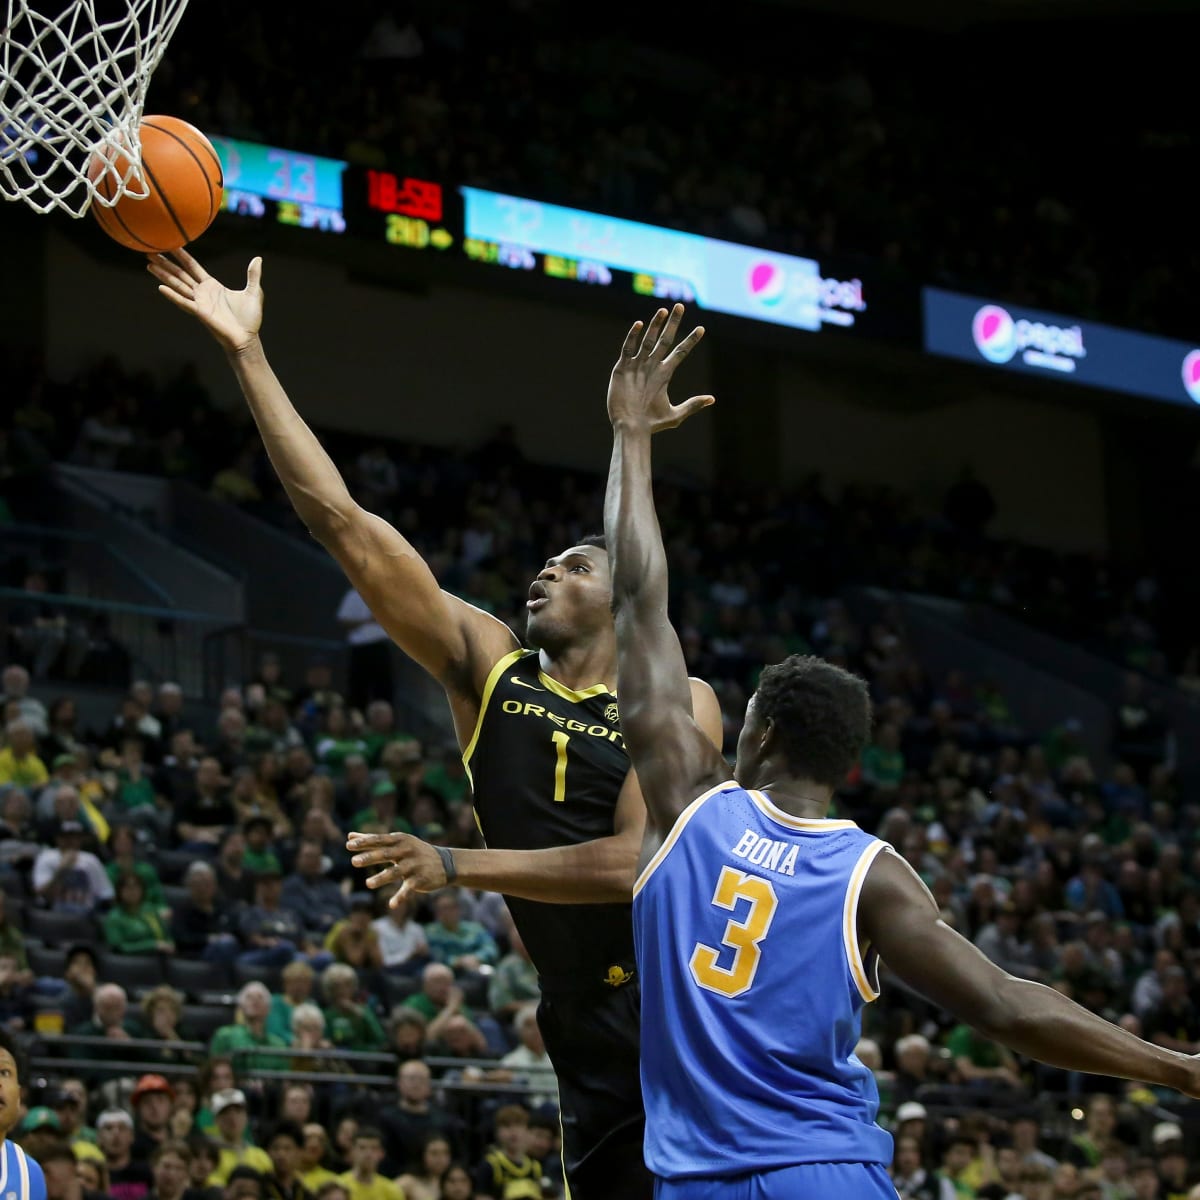 Oregon at Washington Free Live Stream College Basketball Online - How to Watch and Stream Major League and College Sports